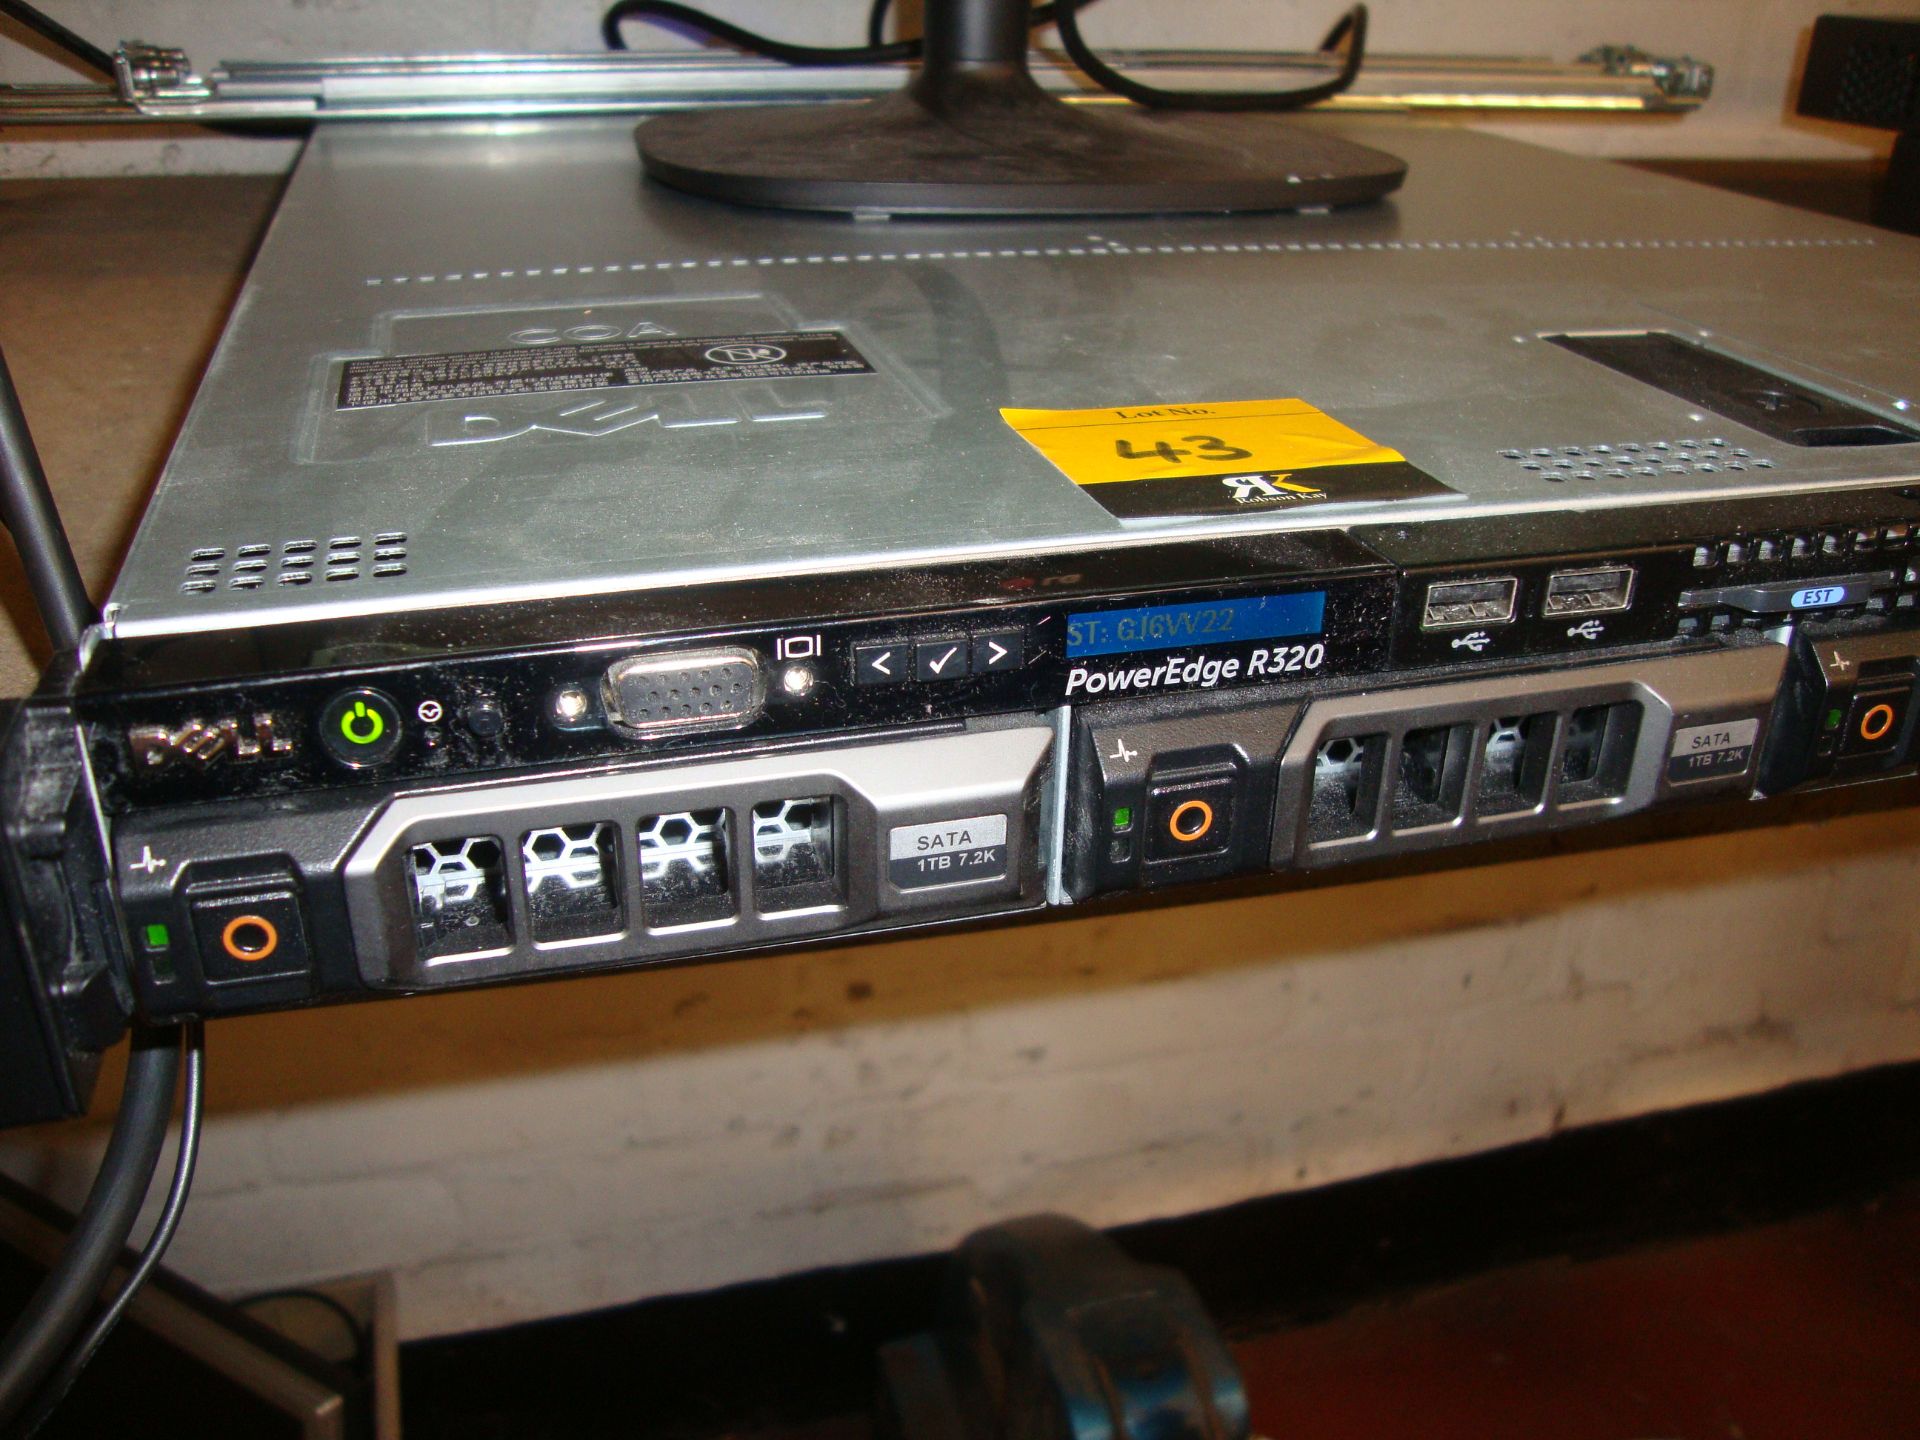 Dell PowerEdge R320 rack mountable server with 2.4GHz Intel Xeon processors, 16Gb RAM with RAID 5 - Image 5 of 18